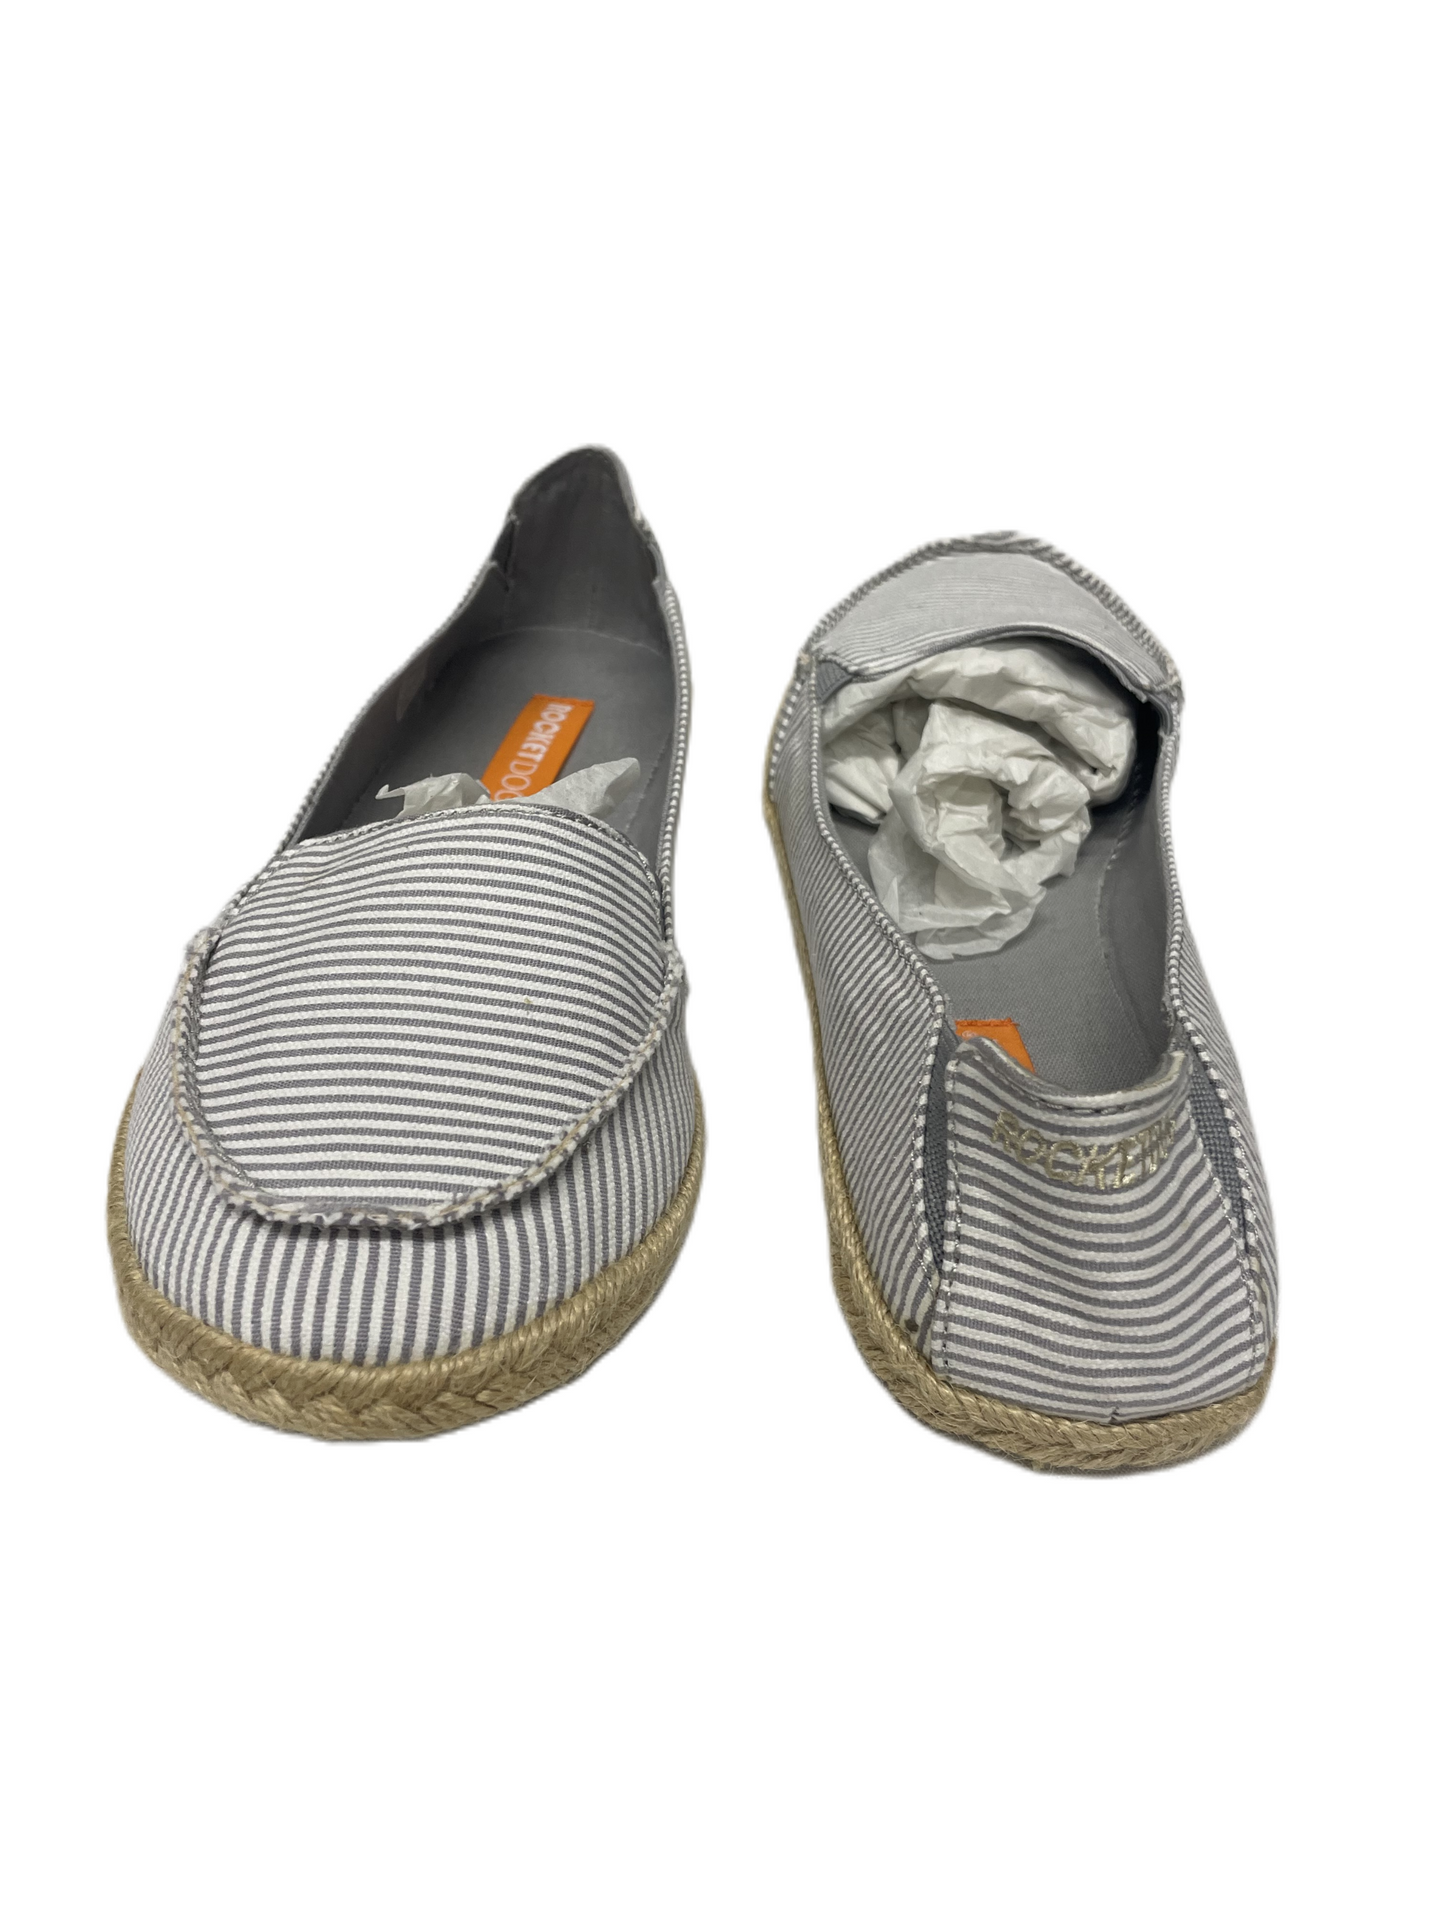 Shoes Flats Espadrille By Rocket Dogs  Size: 10